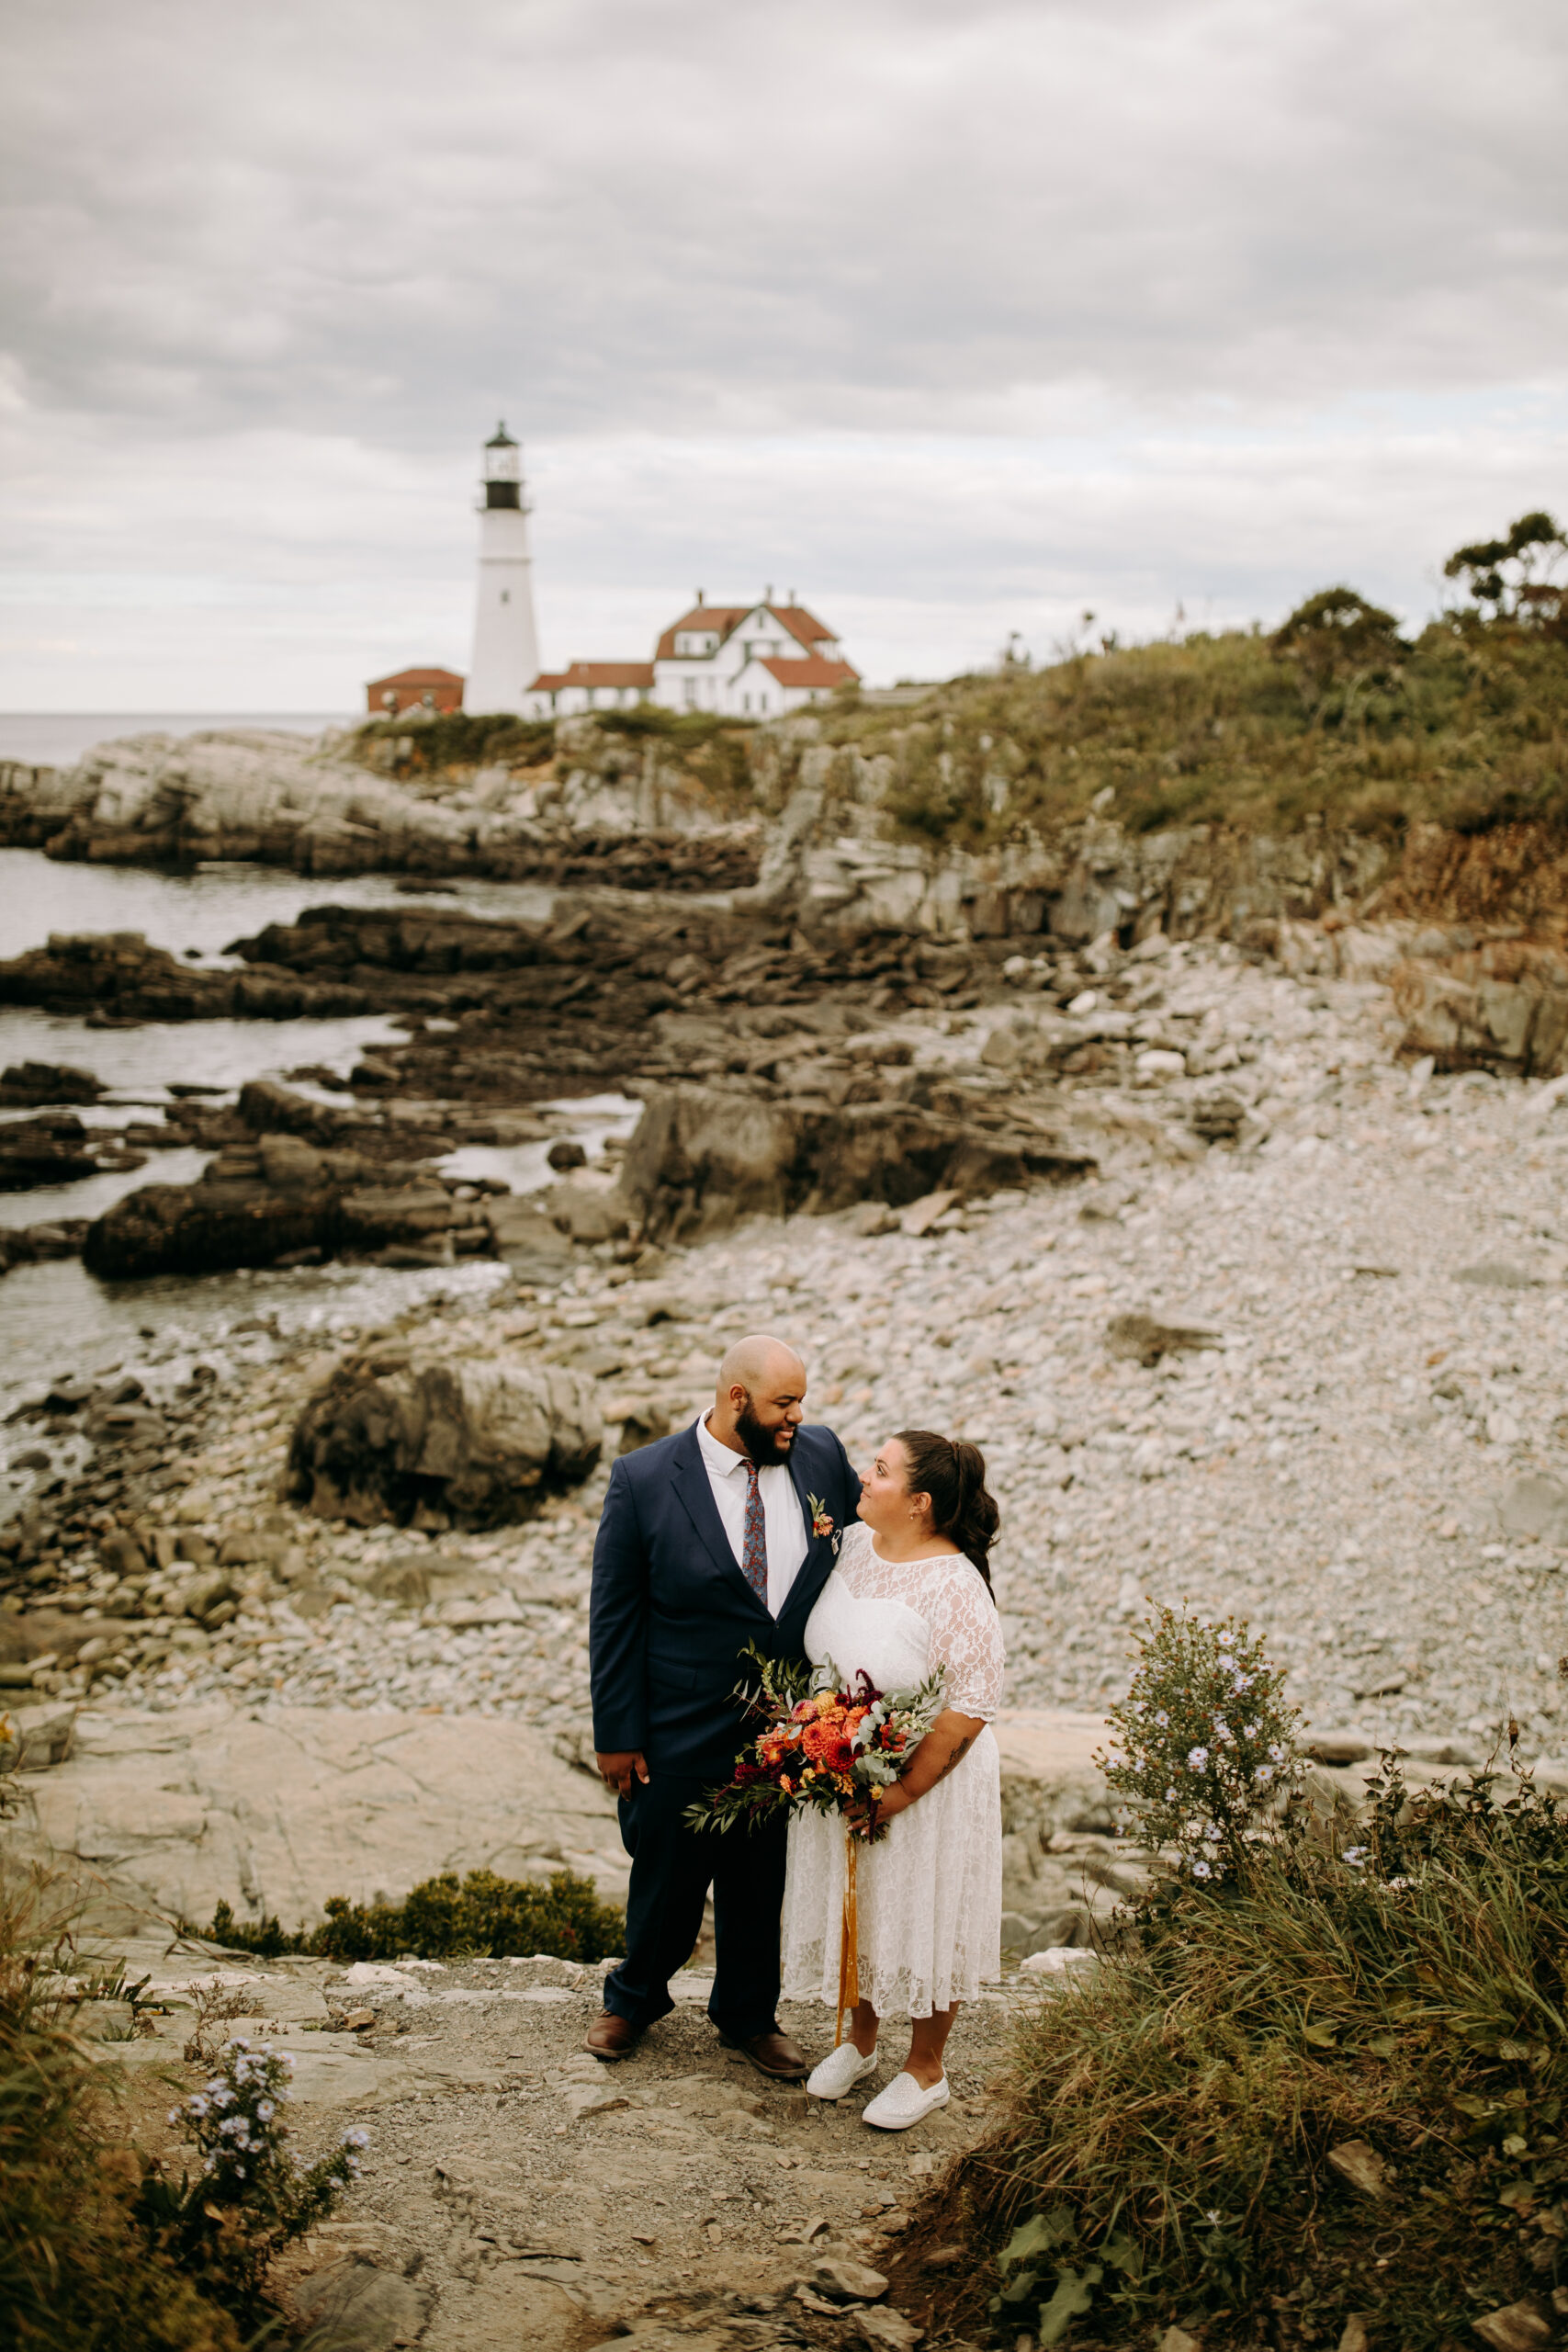 Newlyweds taking in the stunning view at Portland Head Light